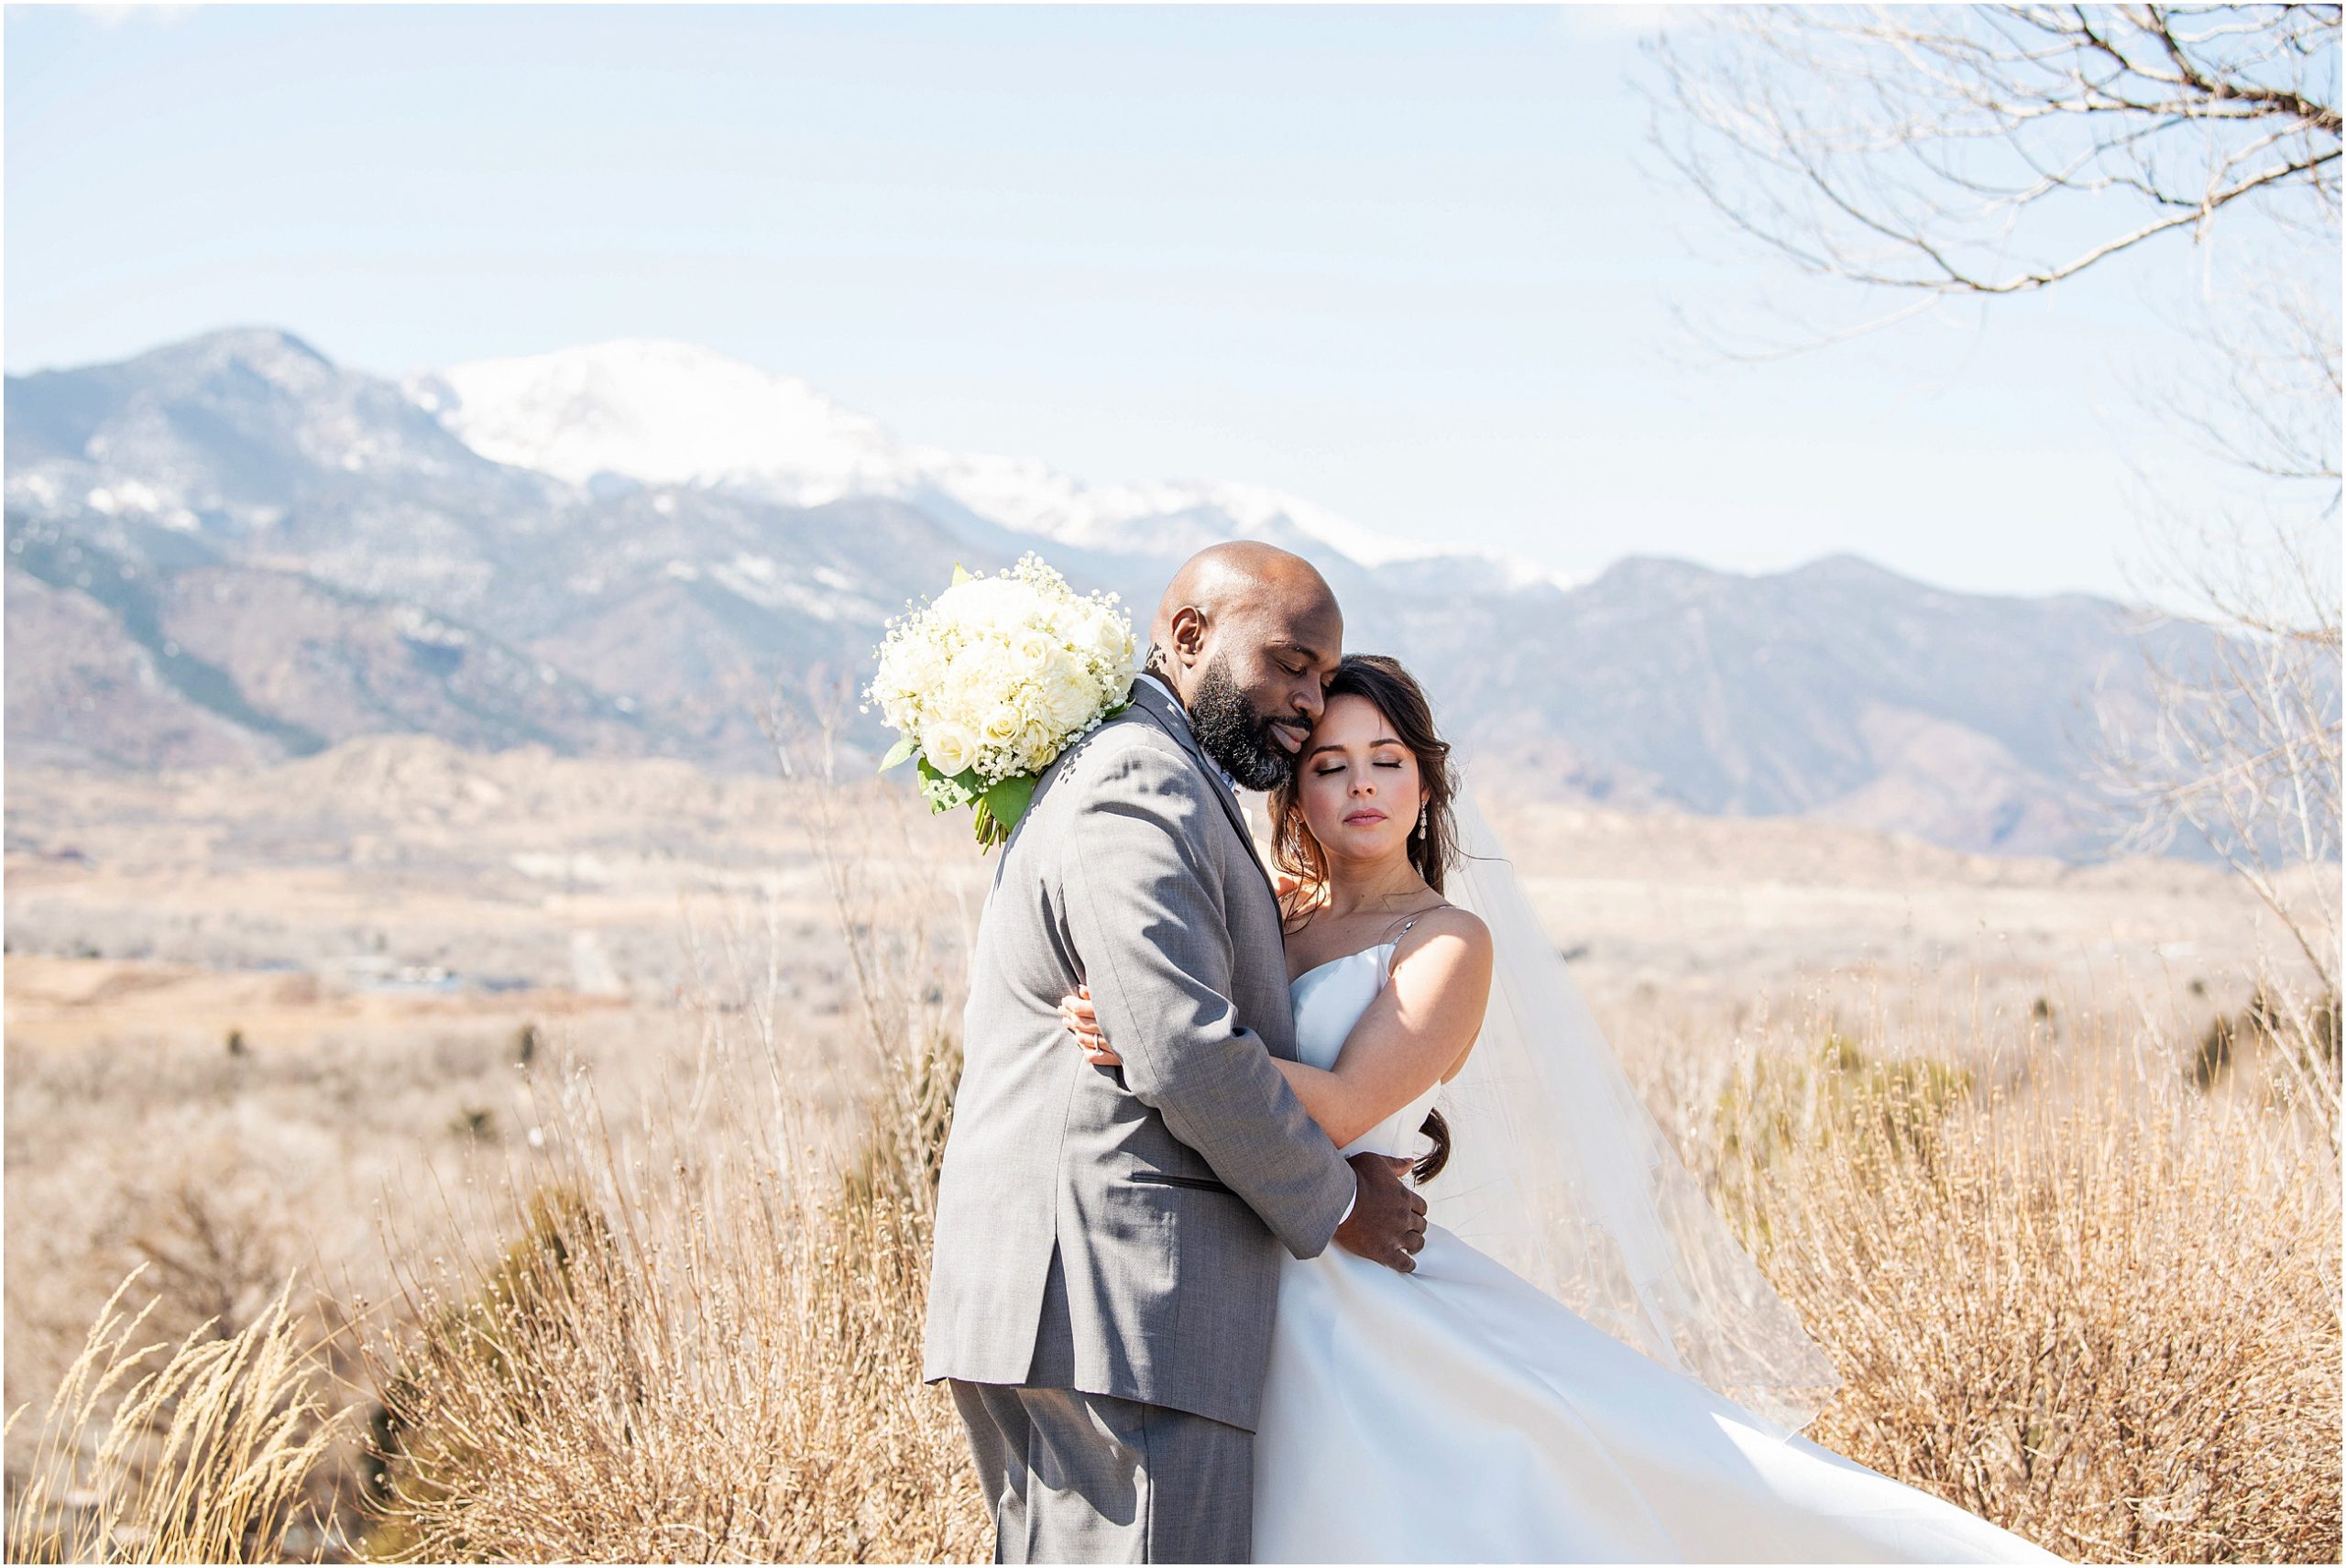 Bride and groom embrace on their wedding day with mountain views behind them.